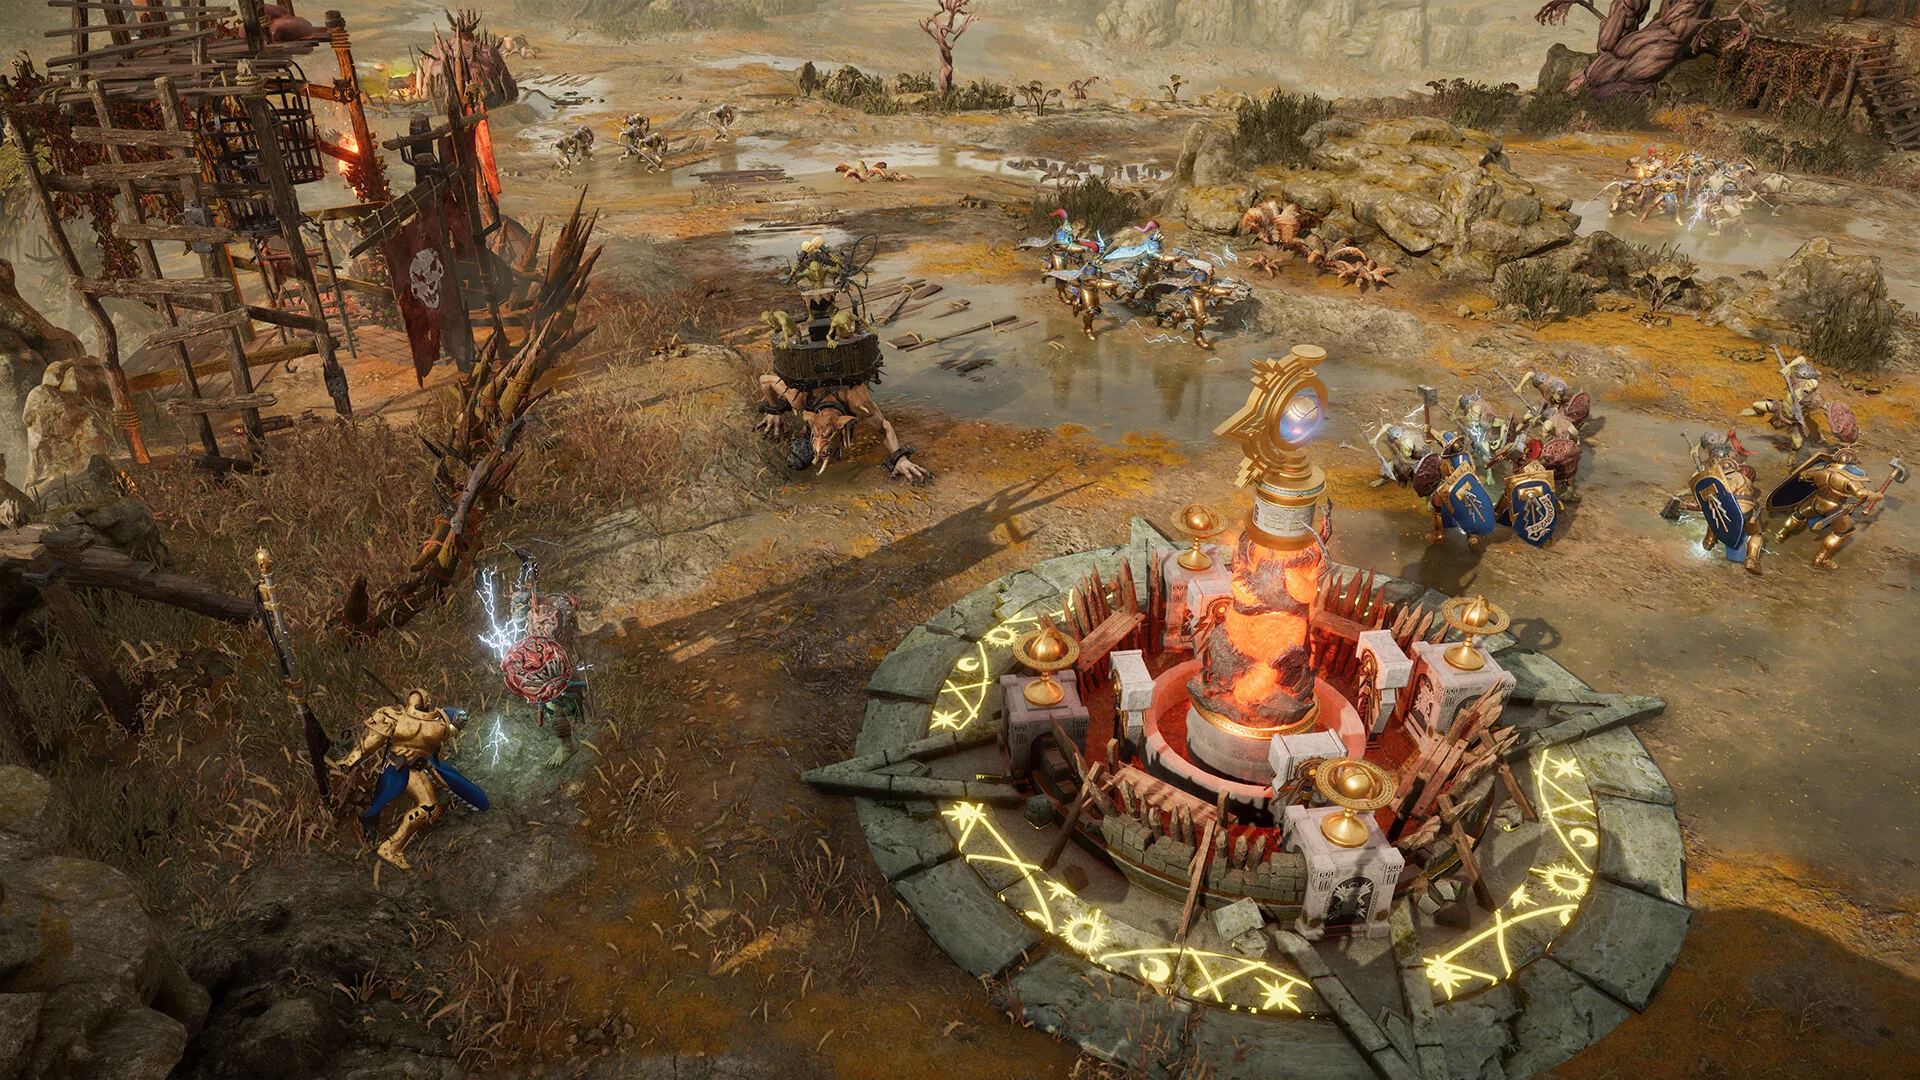 Warhammer Age of Sigmar Realms of Ruin Torrent